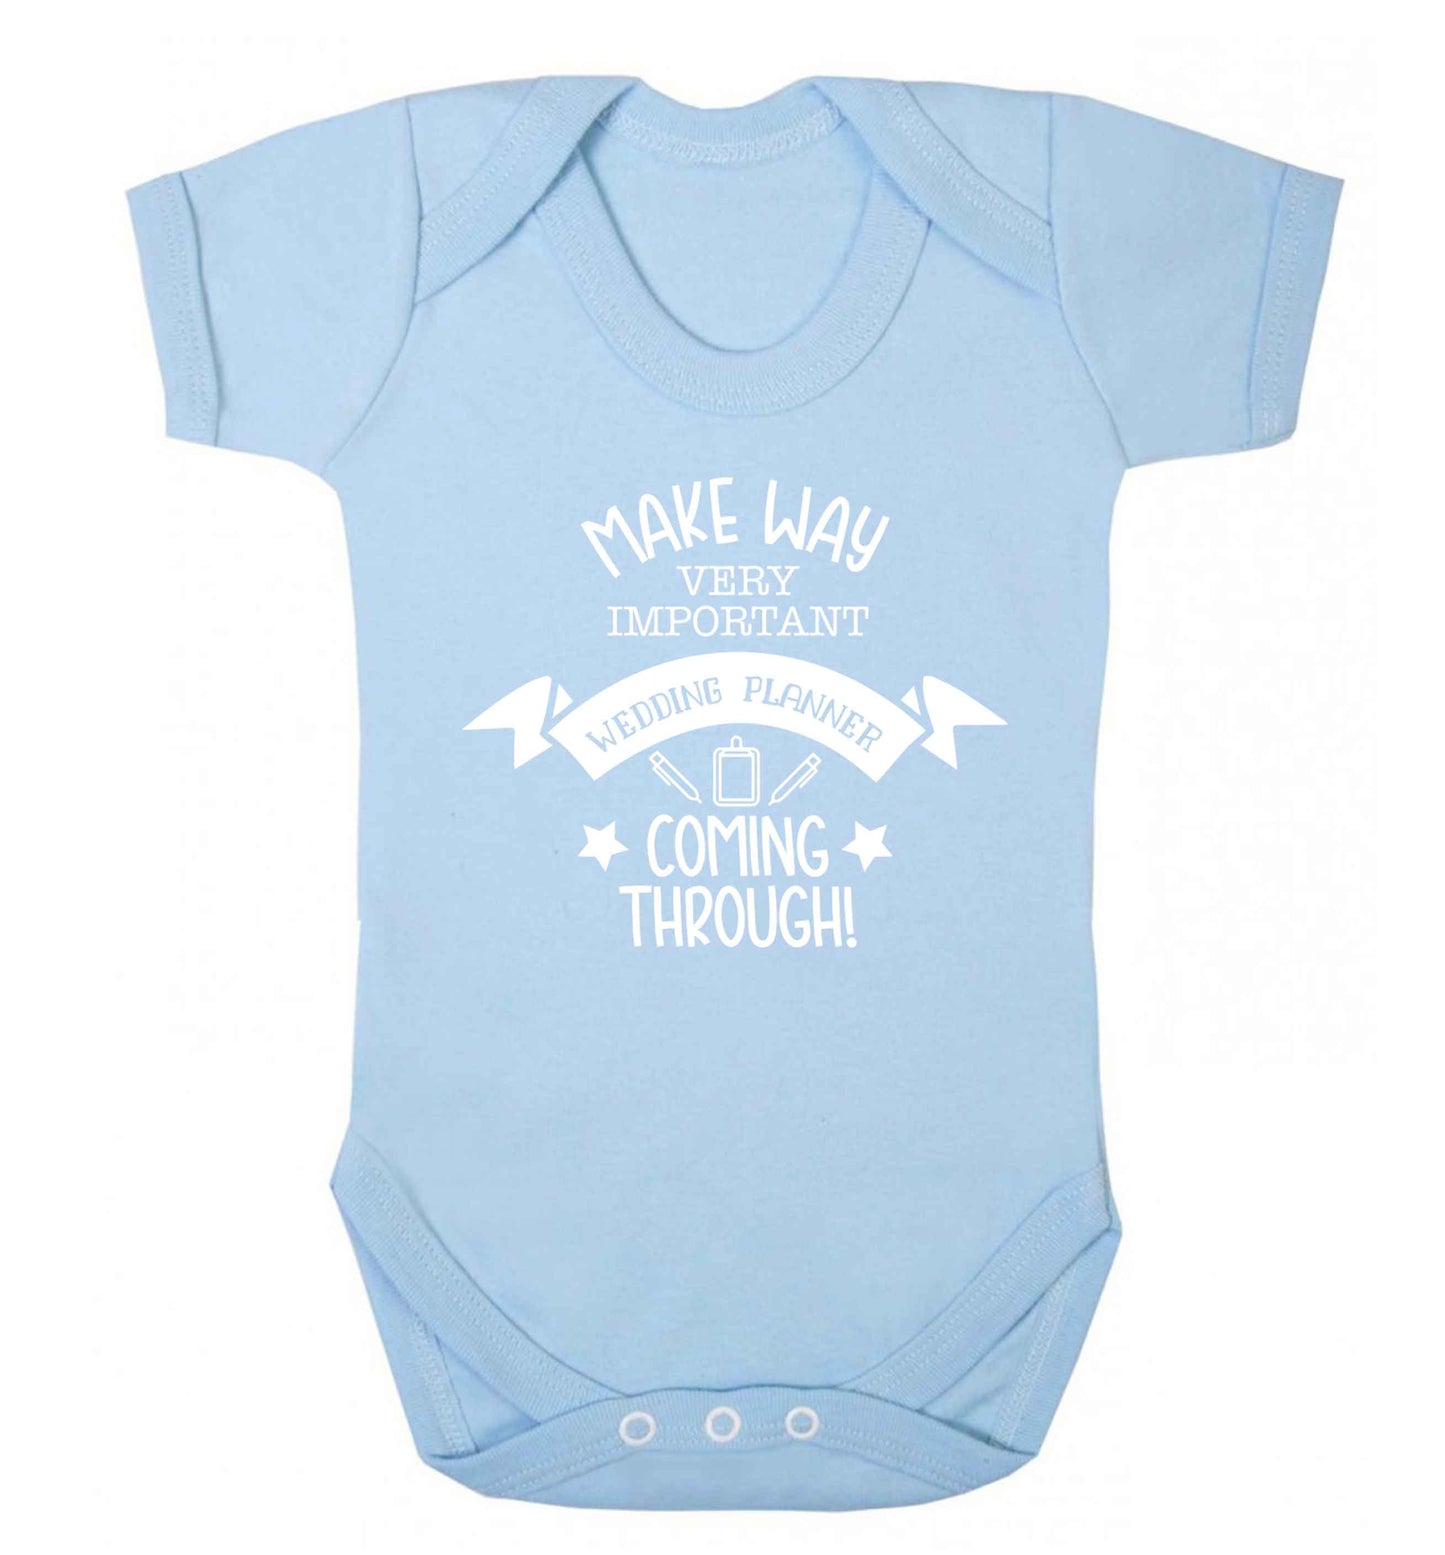 Make way very important wedding planner coming through Baby Vest pale blue 18-24 months